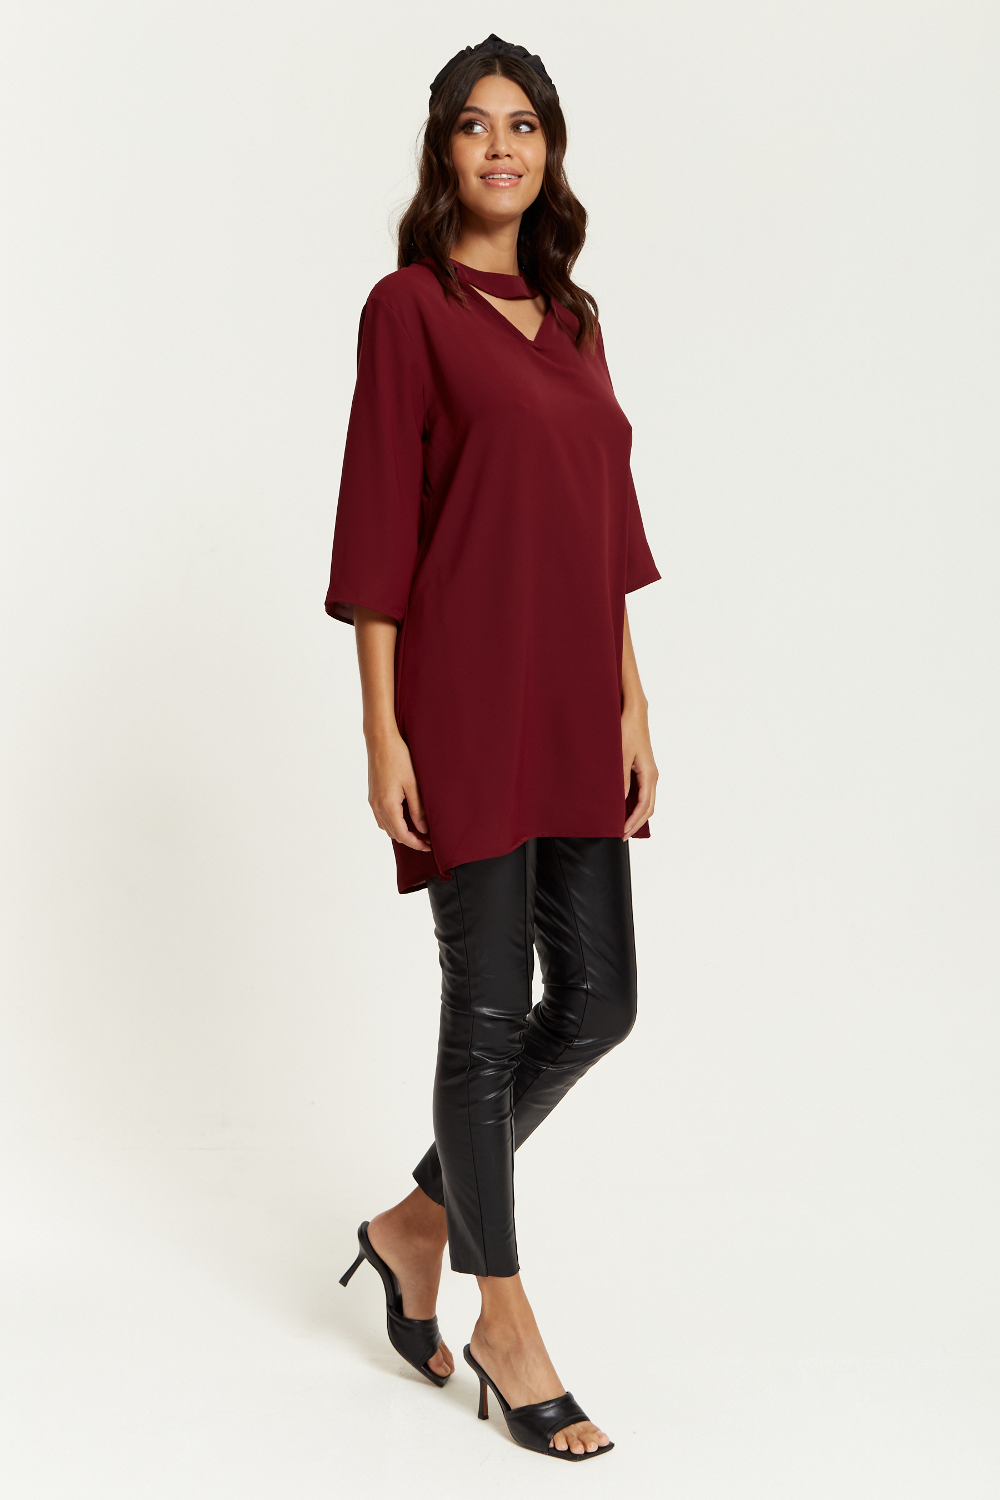 Oversized Detailed Neckline Tunic with 3/4 Sleeves in Burgundy GLR FASHION NETWORKING